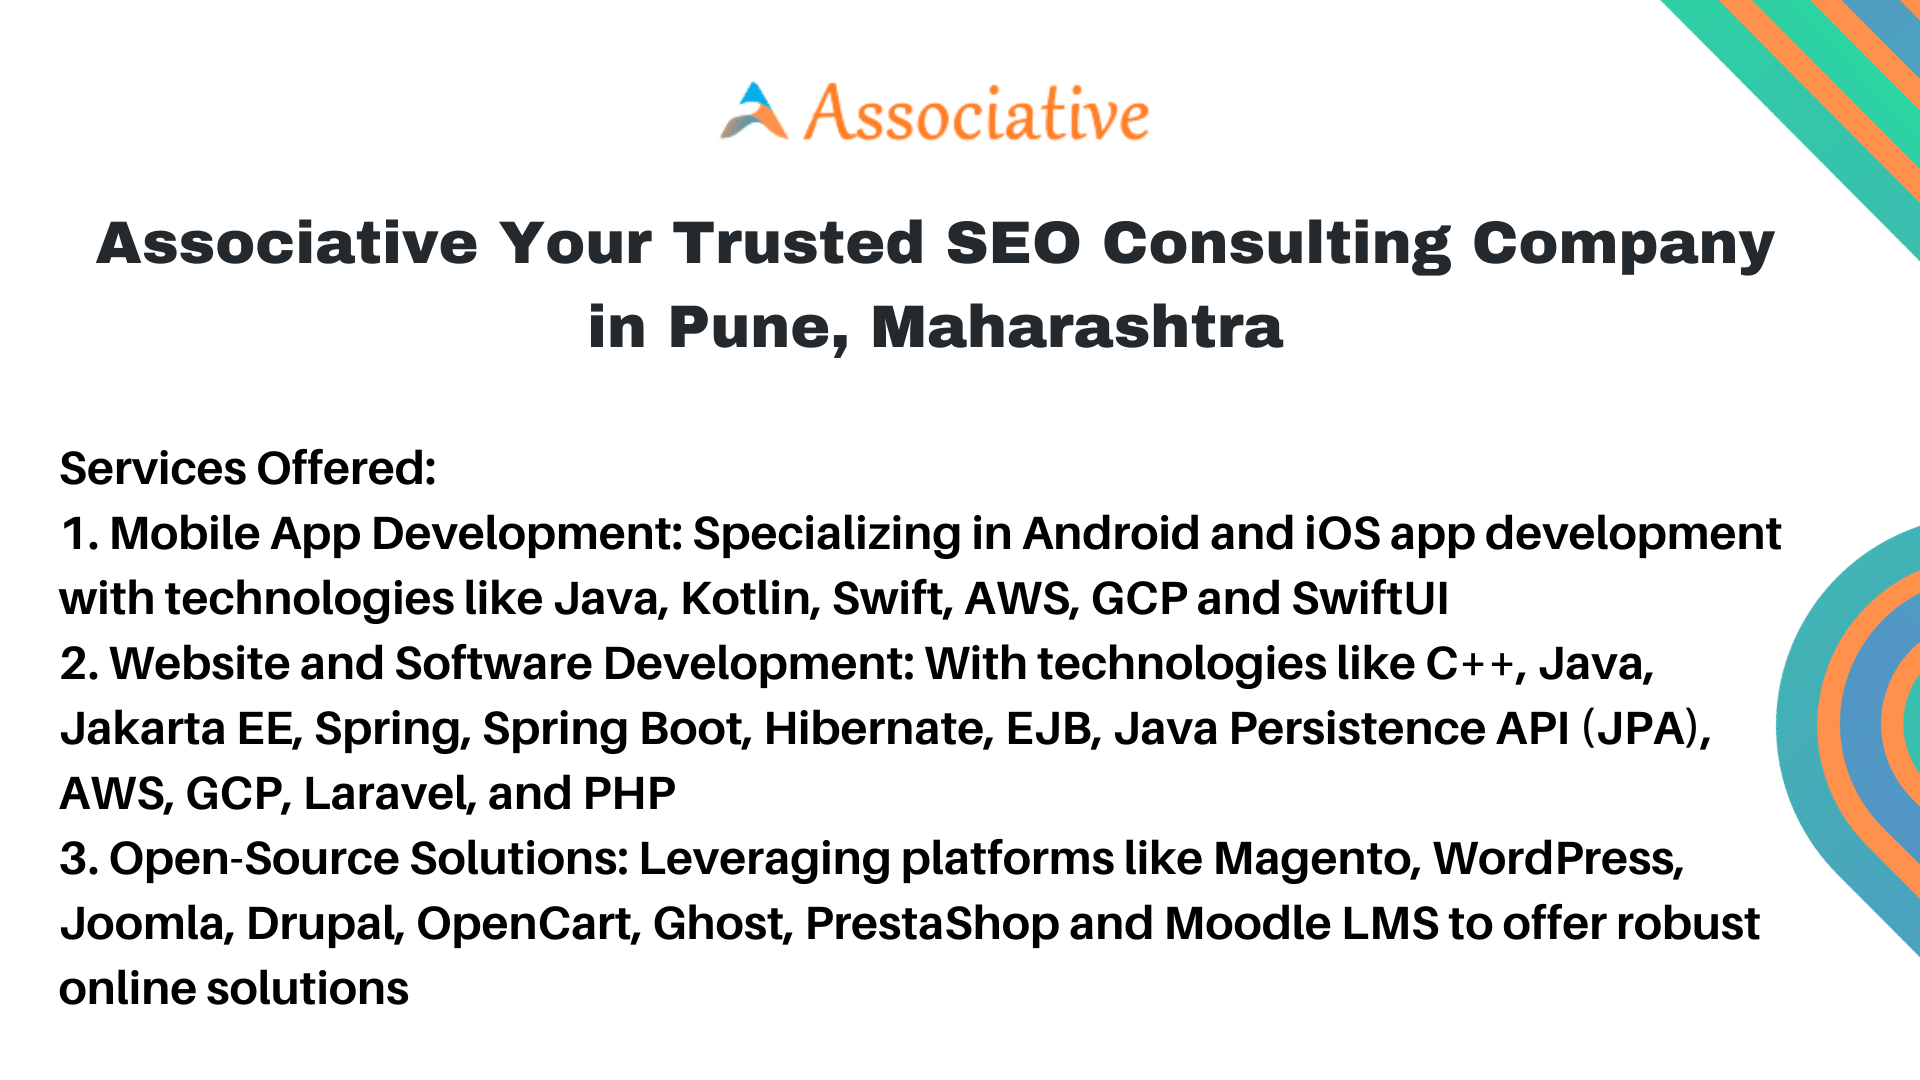 Associative Your Trusted SEO Consulting Company in Pune, Maharashtra